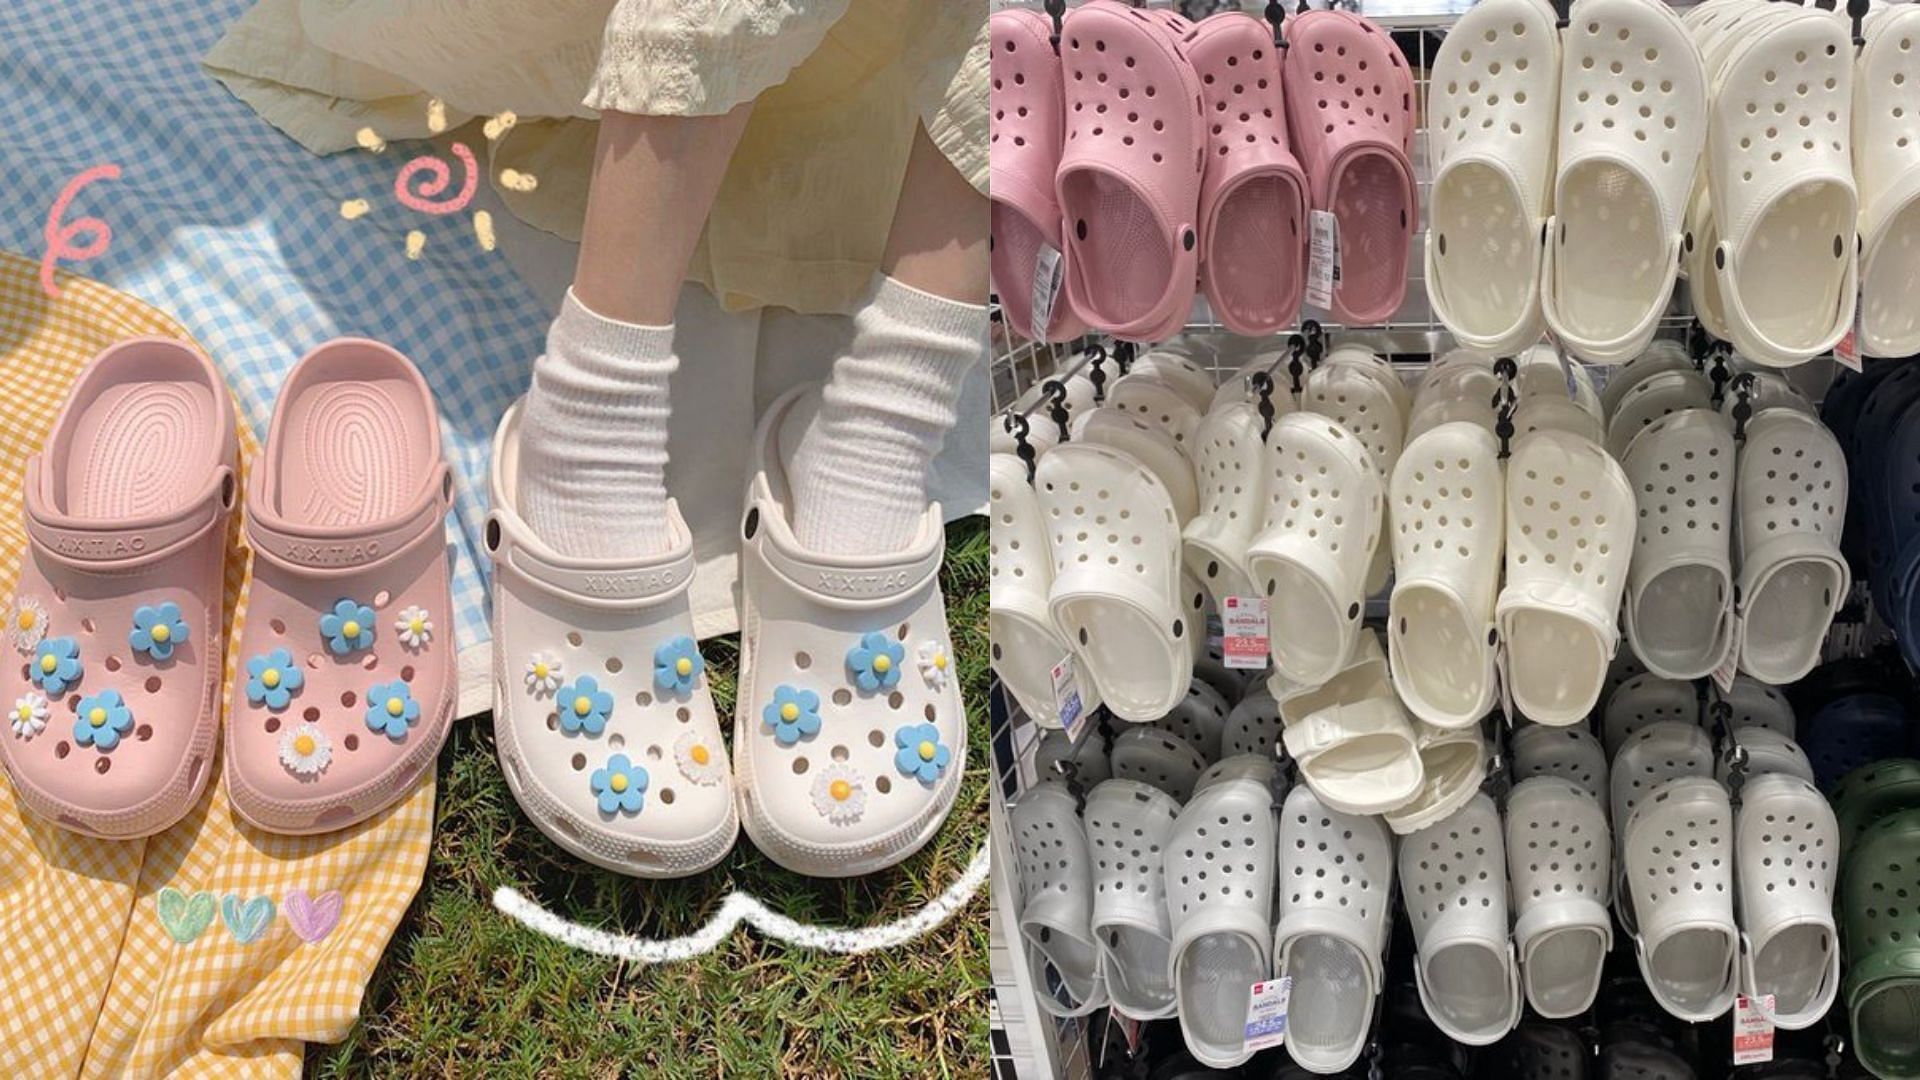 Crocs (left) and Daiso (right) are in conflict amid trademark infringement (Image via Twitter/@jentokki and @qwertybel)